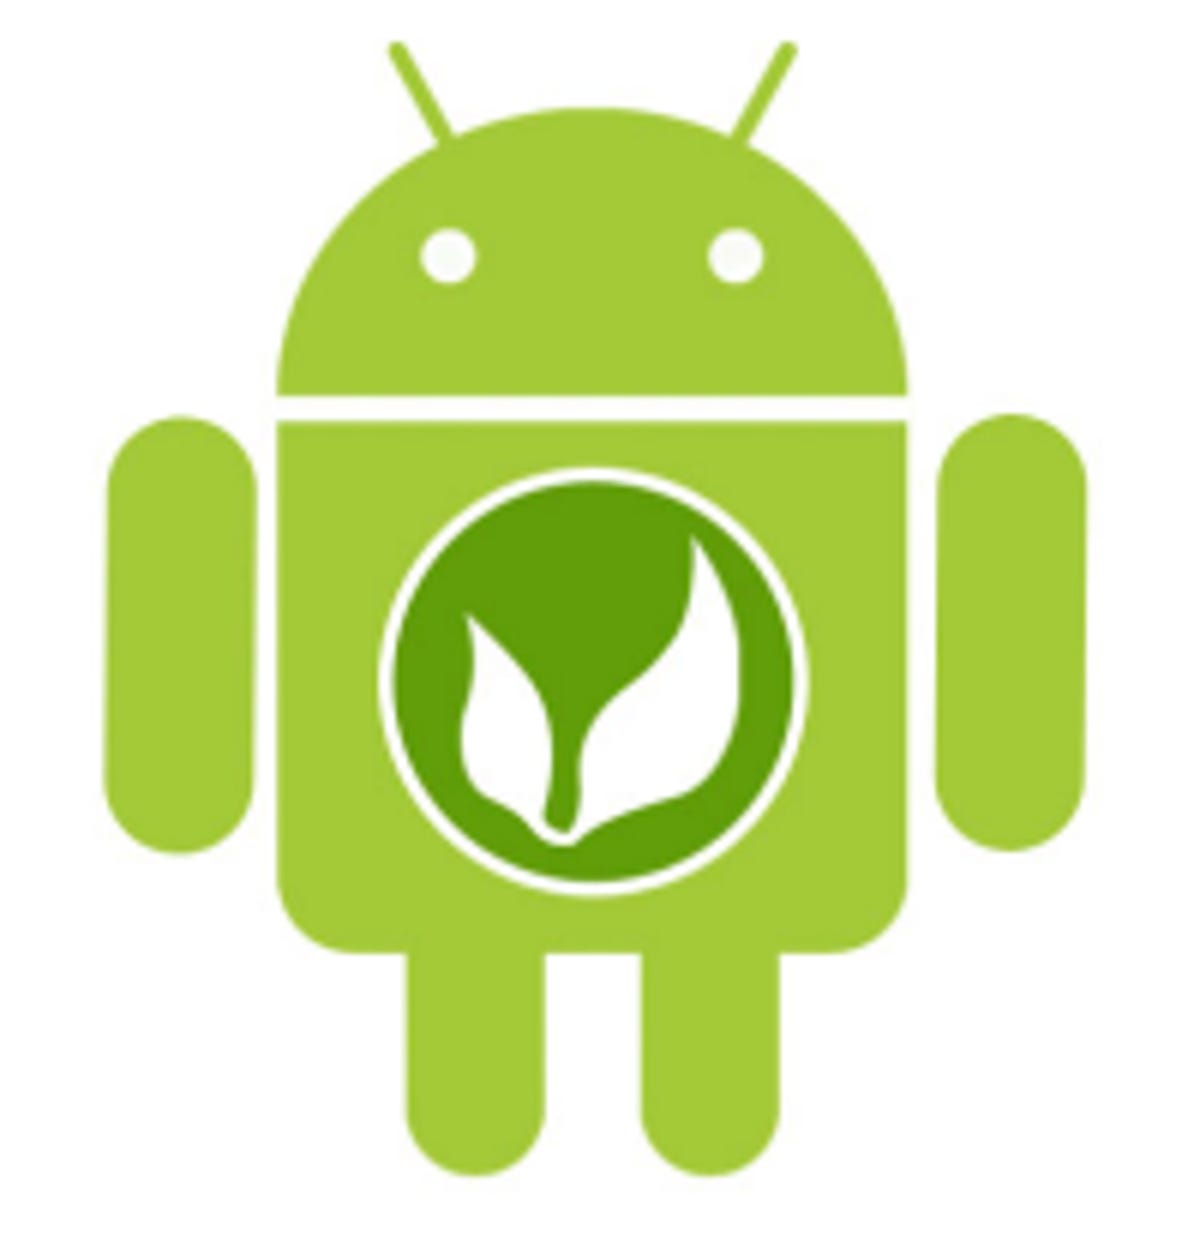 Android with OpenFeint logo